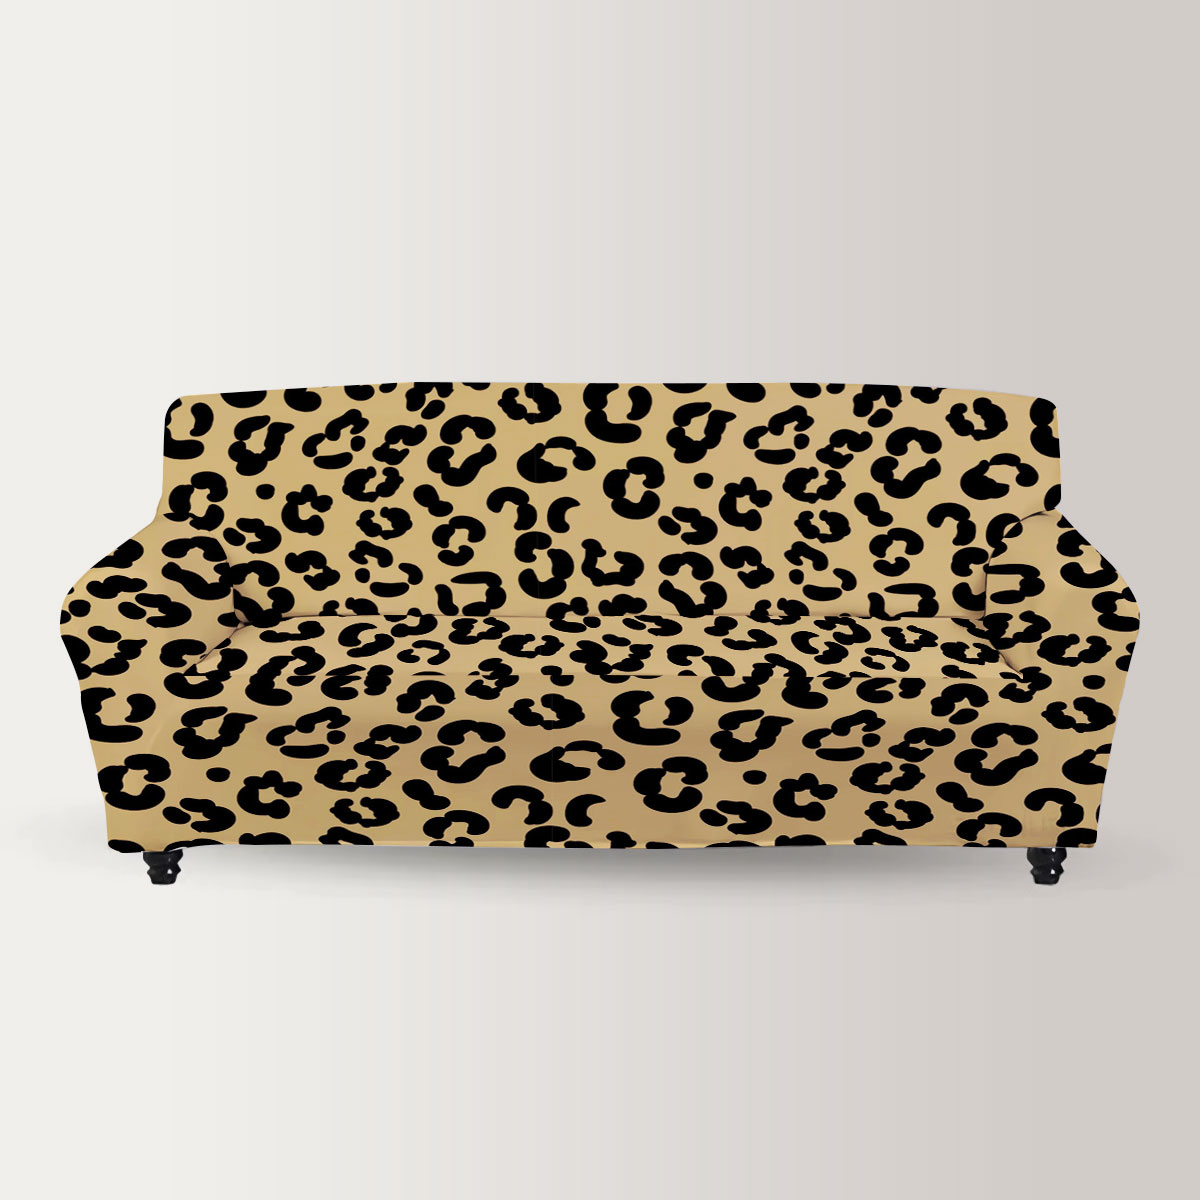 Panther Skin Sofa Cover